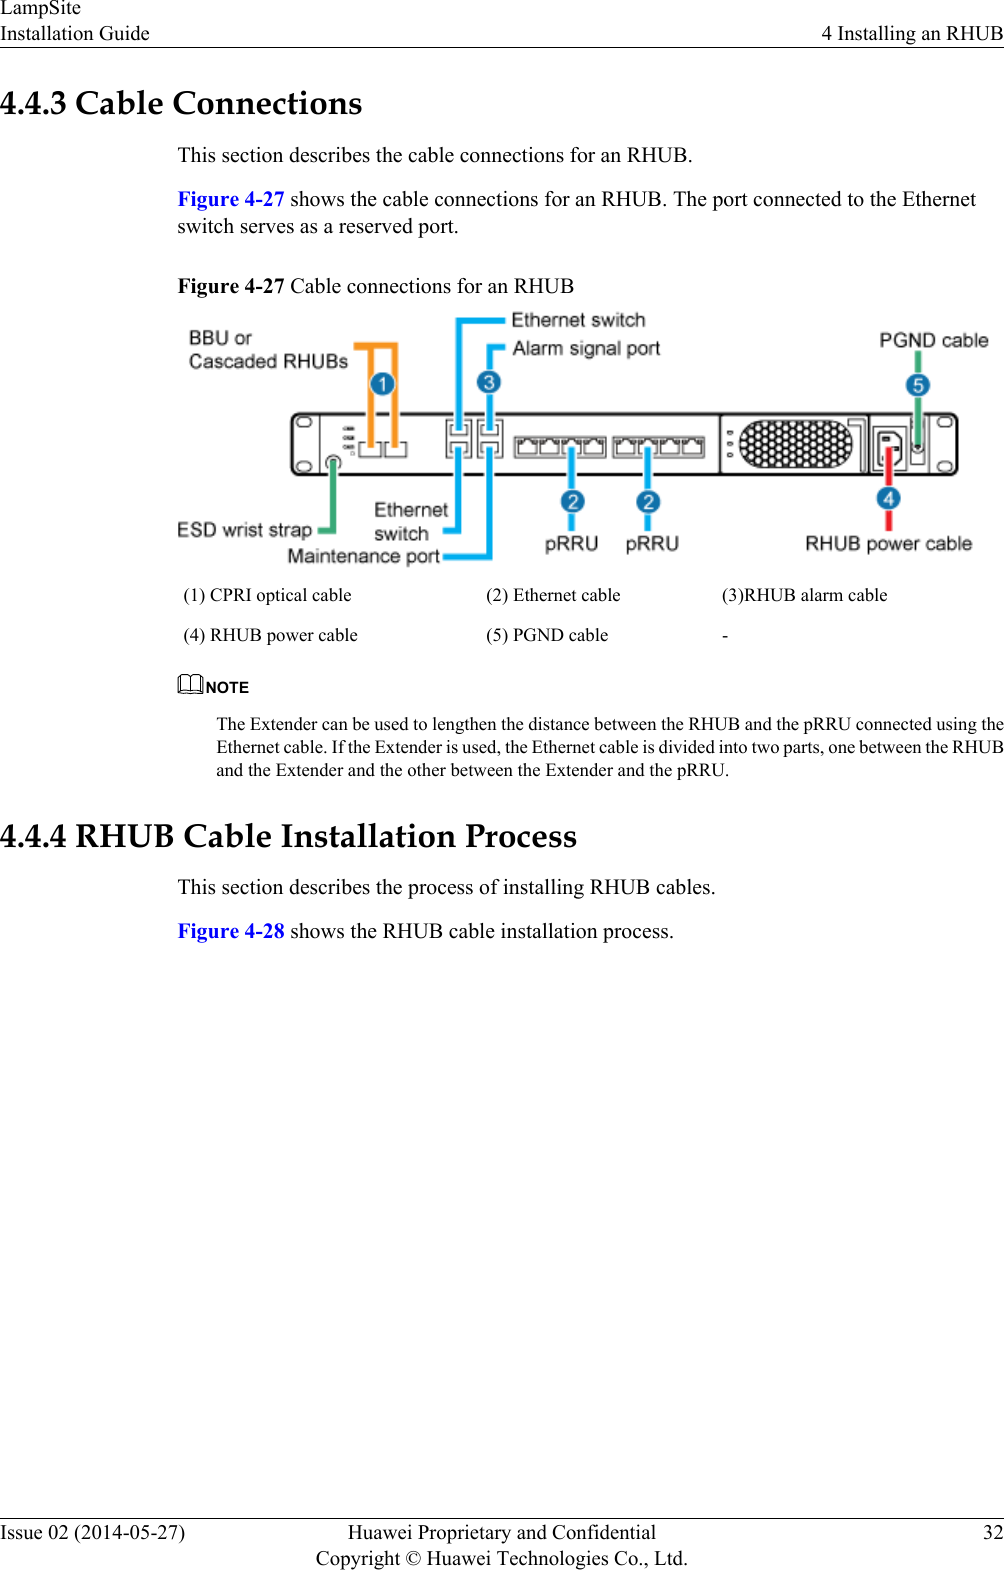 4.4.3 Cable ConnectionsThis section describes the cable connections for an RHUB.Figure 4-27 shows the cable connections for an RHUB. The port connected to the Ethernetswitch serves as a reserved port.Figure 4-27 Cable connections for an RHUB(1) CPRI optical cable (2) Ethernet cable (3)RHUB alarm cable(4) RHUB power cable (5) PGND cable -NOTEThe Extender can be used to lengthen the distance between the RHUB and the pRRU connected using theEthernet cable. If the Extender is used, the Ethernet cable is divided into two parts, one between the RHUBand the Extender and the other between the Extender and the pRRU.4.4.4 RHUB Cable Installation ProcessThis section describes the process of installing RHUB cables.Figure 4-28 shows the RHUB cable installation process.LampSiteInstallation Guide 4 Installing an RHUBIssue 02 (2014-05-27) Huawei Proprietary and ConfidentialCopyright © Huawei Technologies Co., Ltd.32